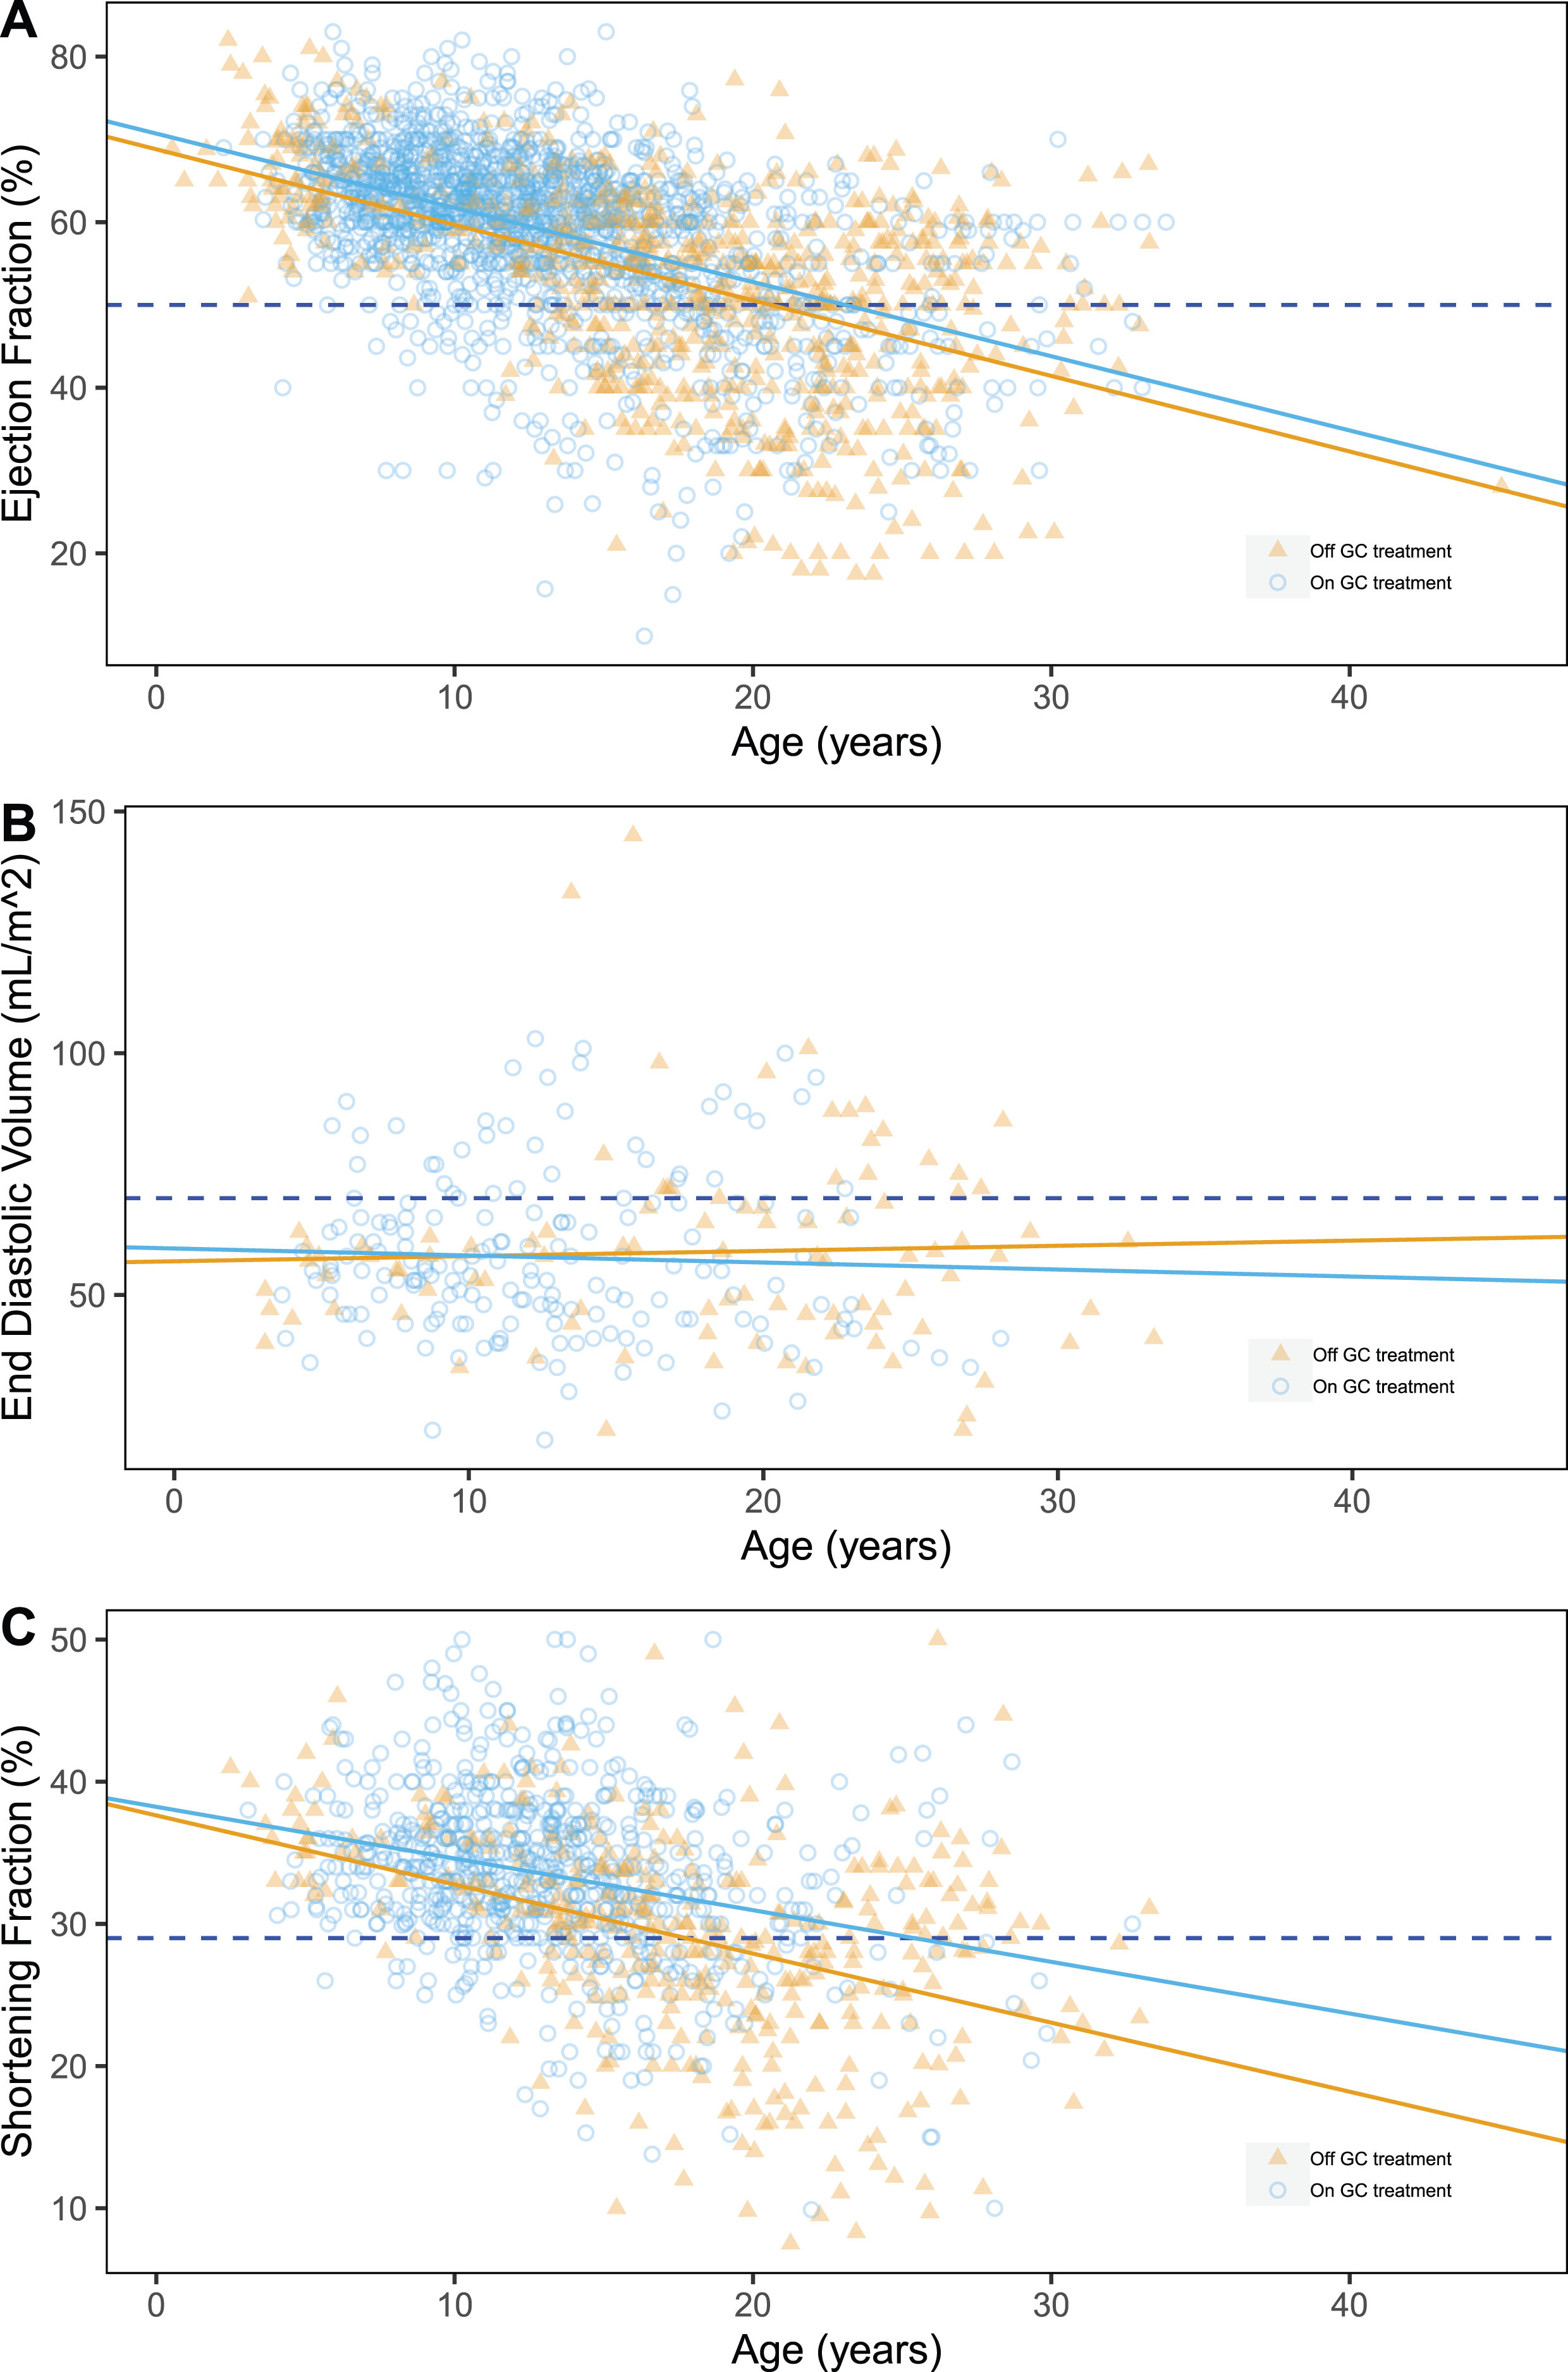 Scatter plots of ejection fraction (%) (A), shortening fraction (%) (B) and end-diastolic volume (mL/m2) (C) by age, grouped by GC treatment at evaluation time. Pathological thresholds are marked by dashed lines.